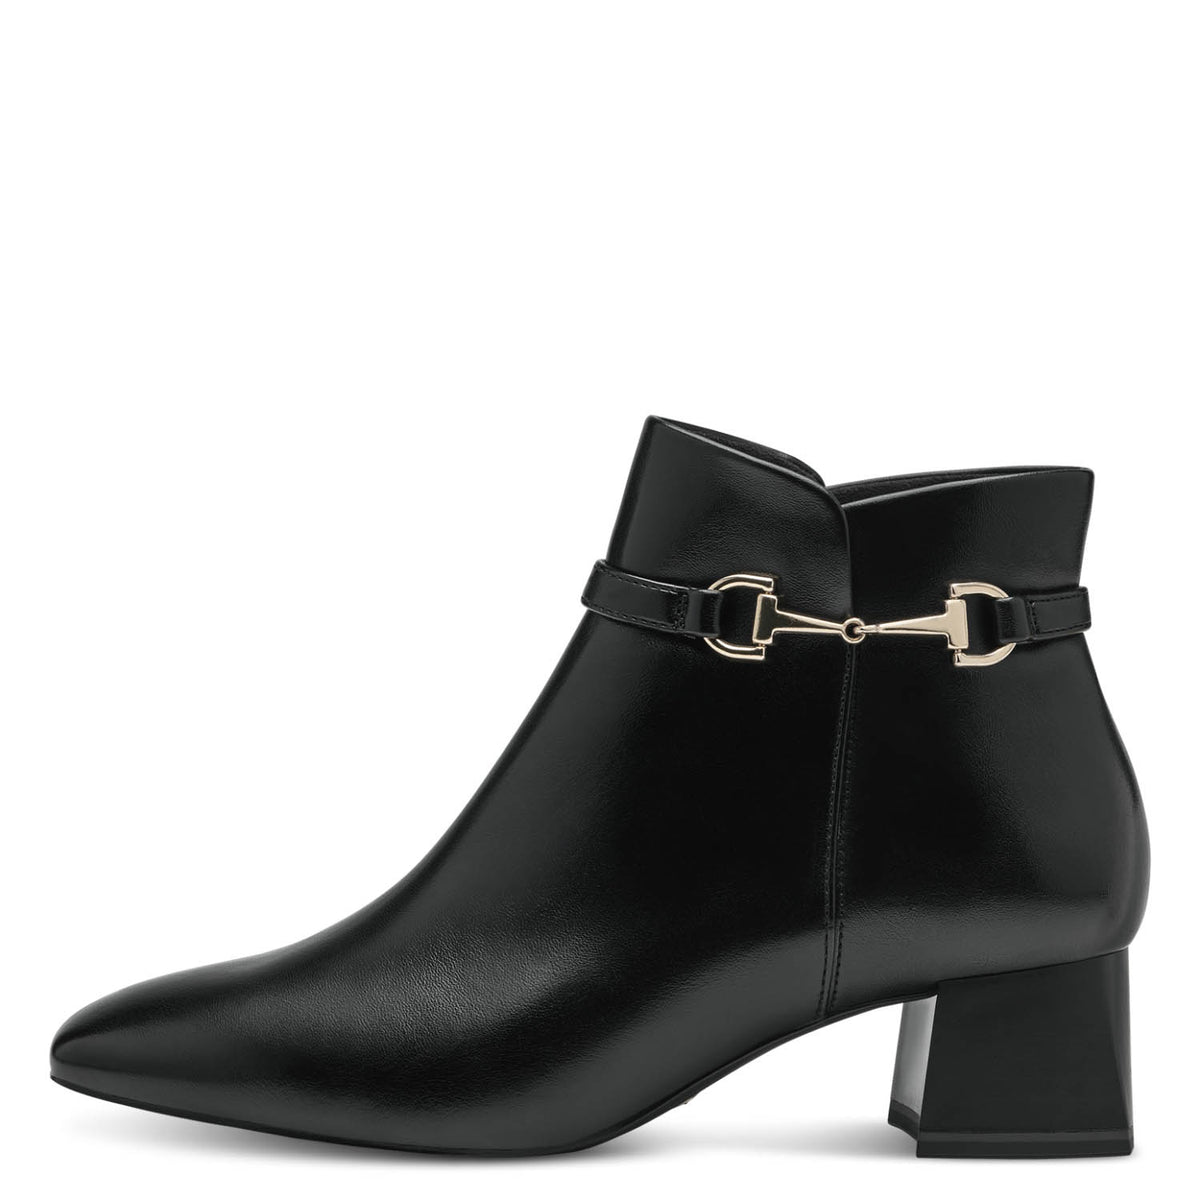 Front view of Tamaris ankle boot with a block heel.